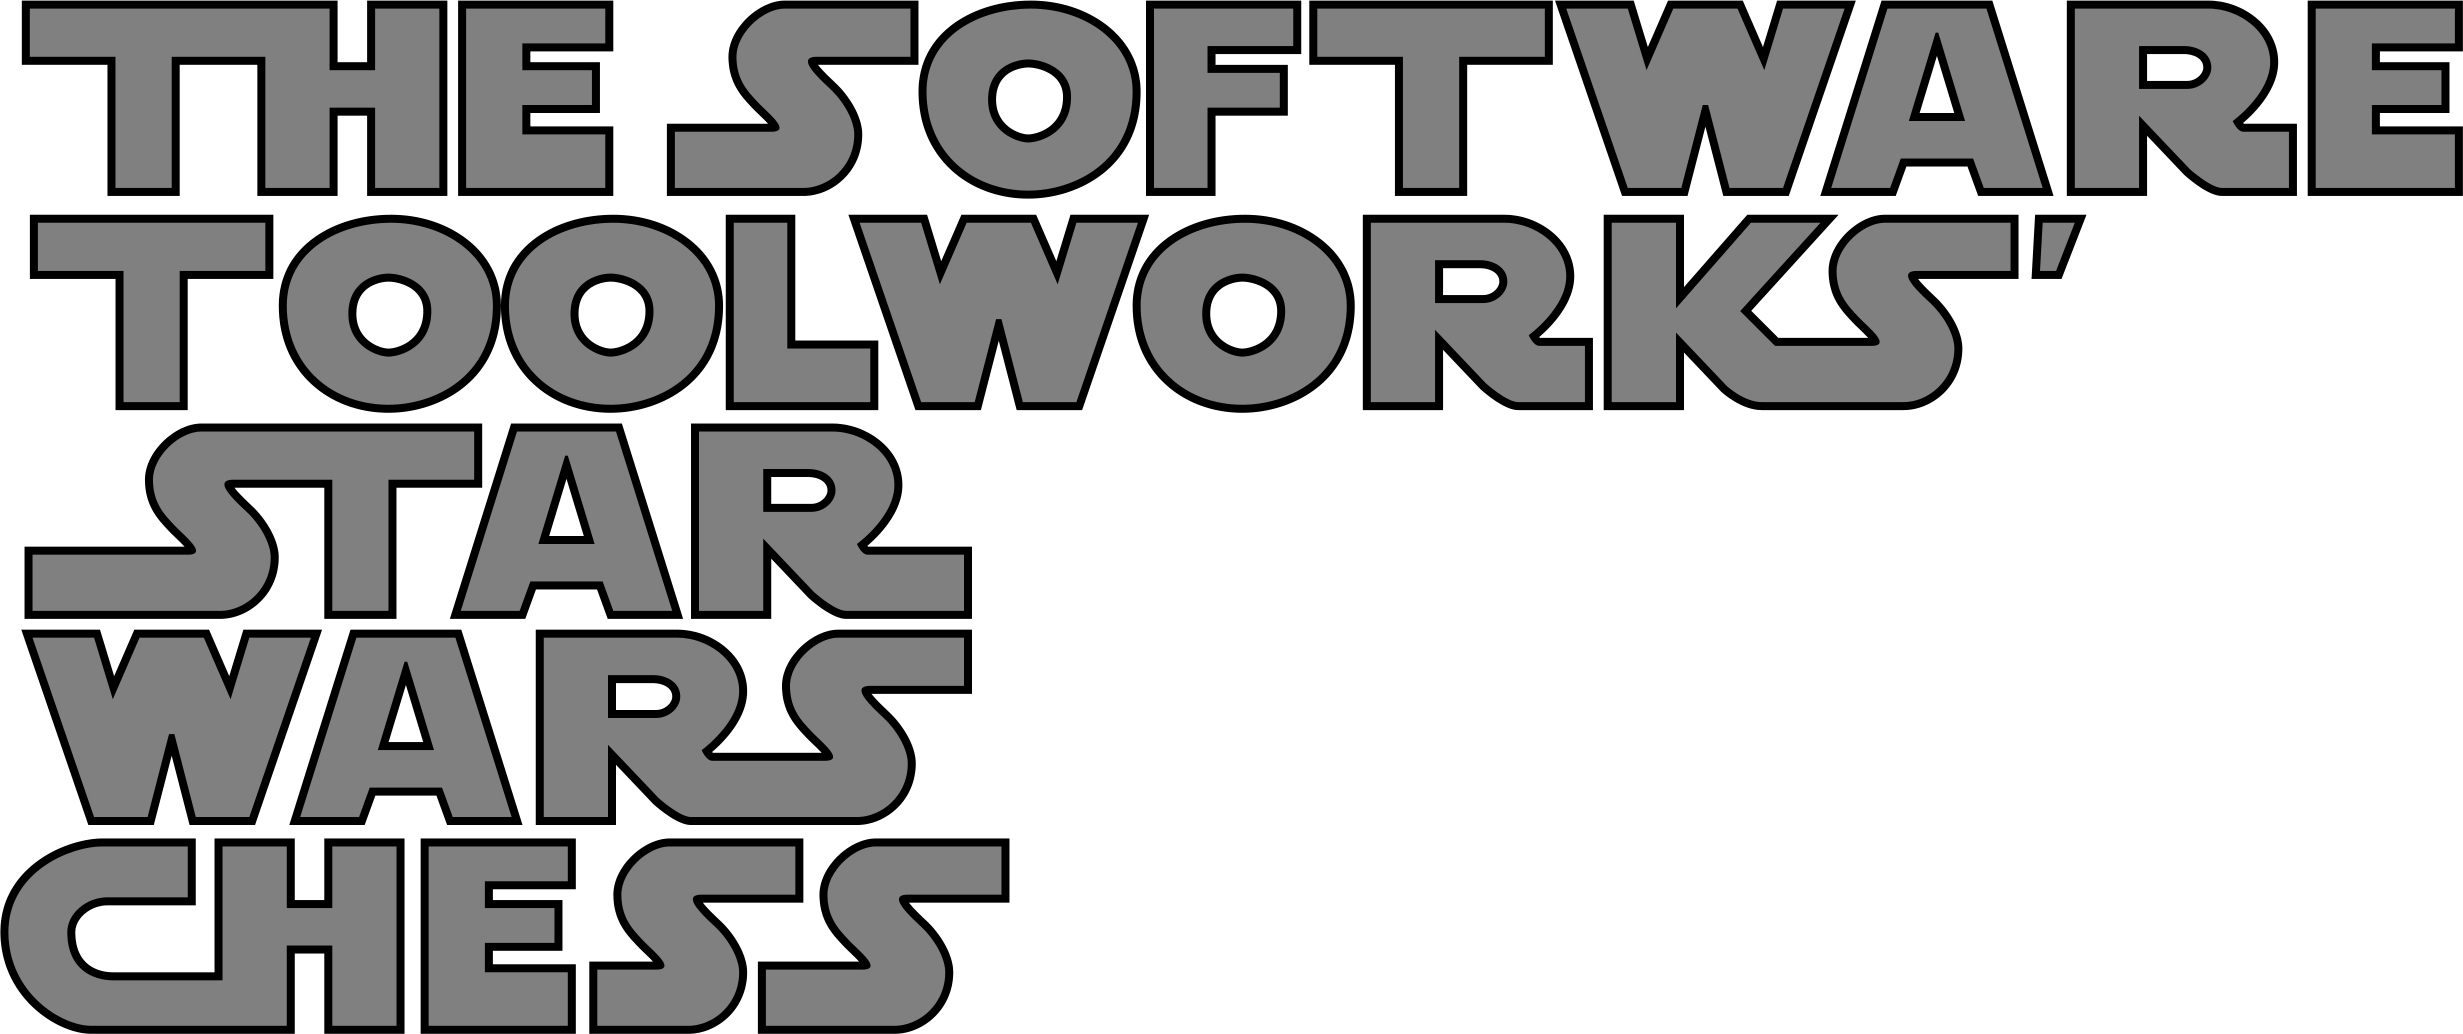 The Software Toolworks' Star Wars Chess Images - LaunchBox Games Database